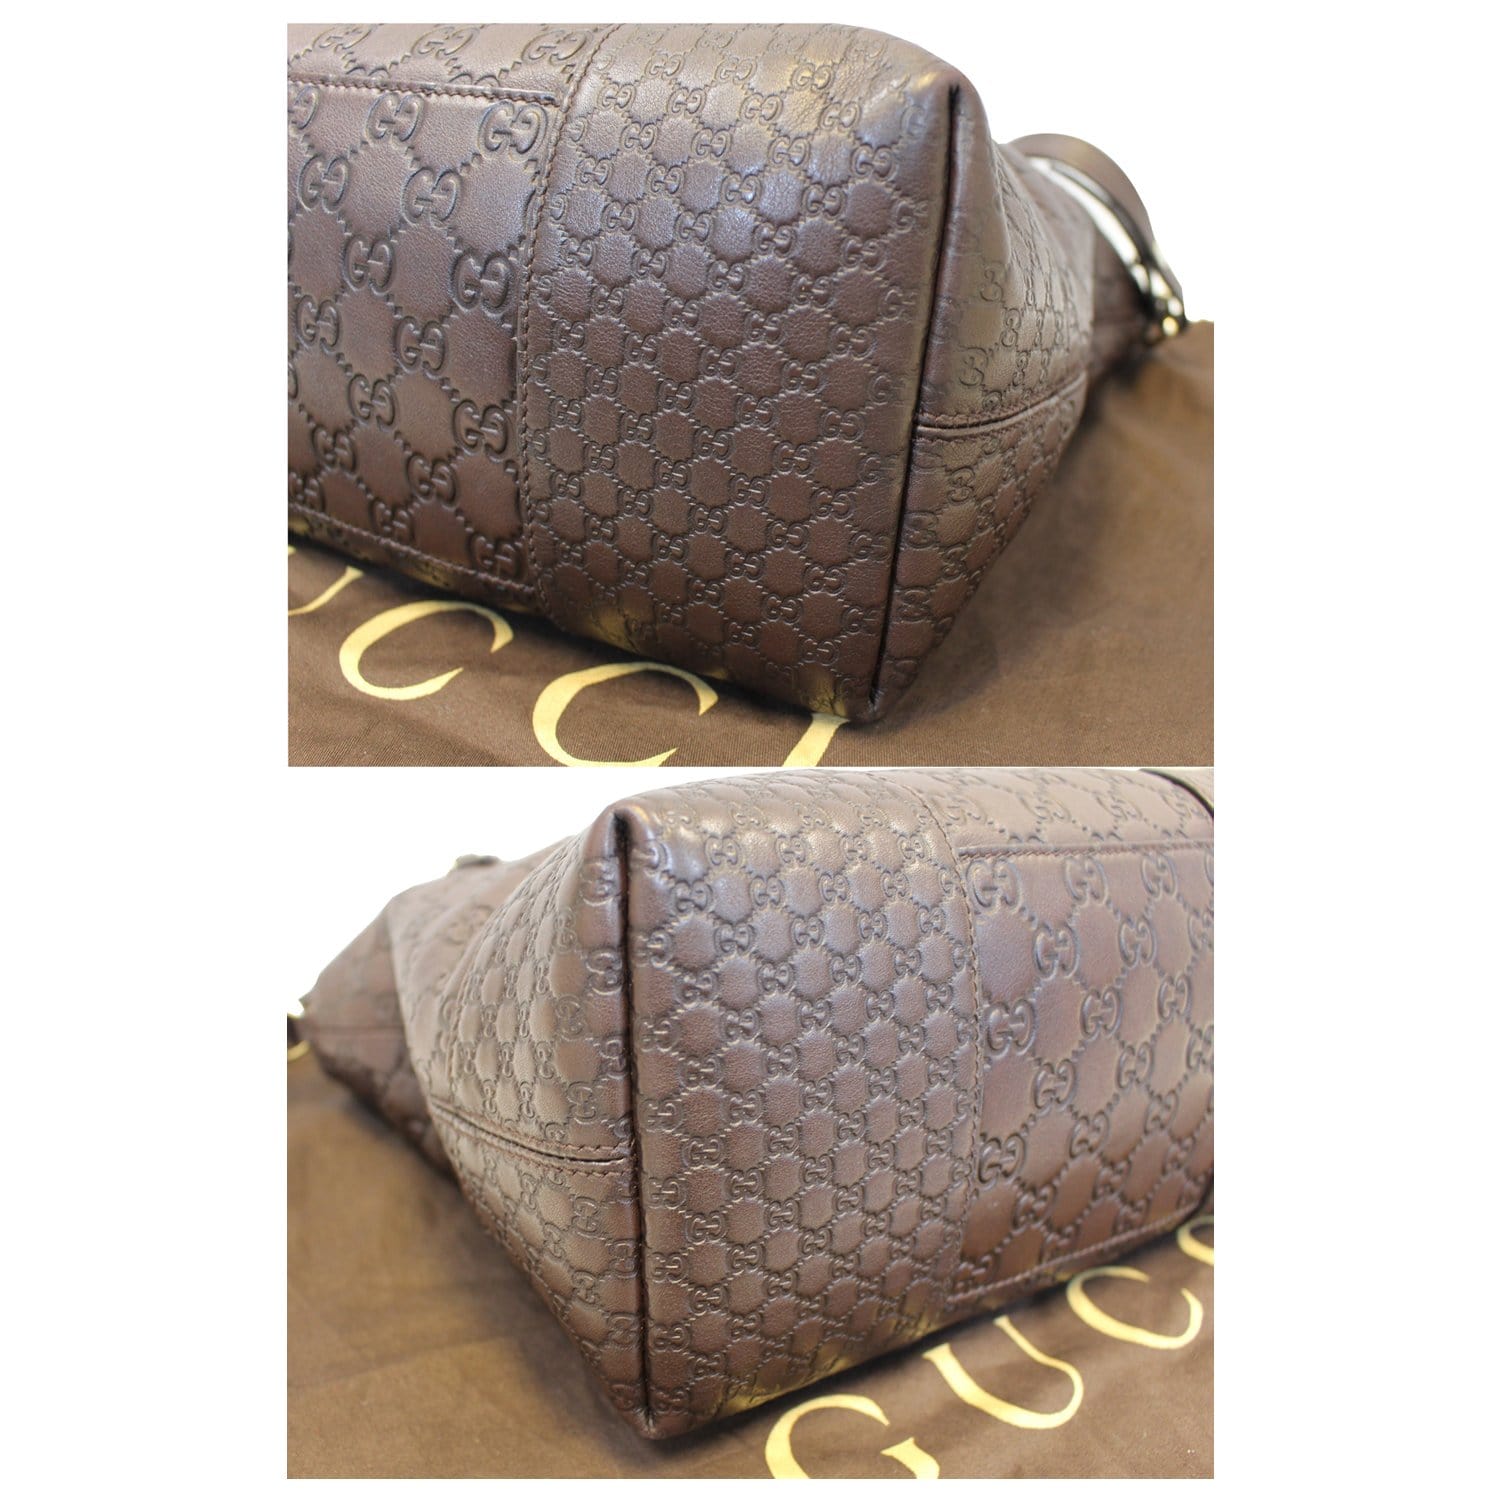 gucci womens bag authentic new With Serial Number